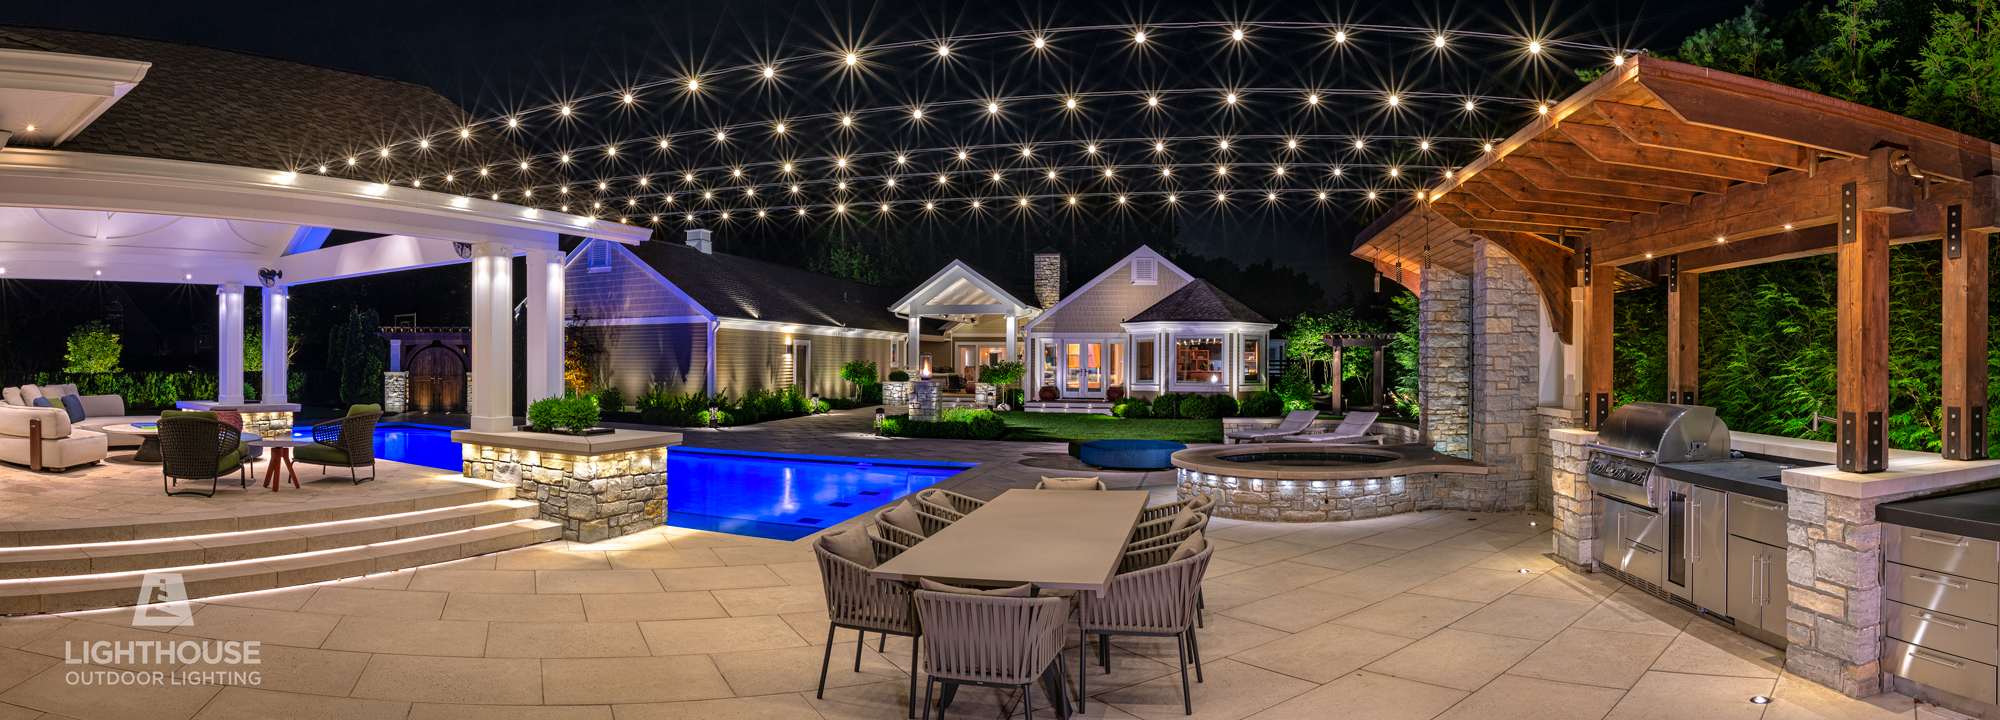 Patio String Lighting in Woxall, PA